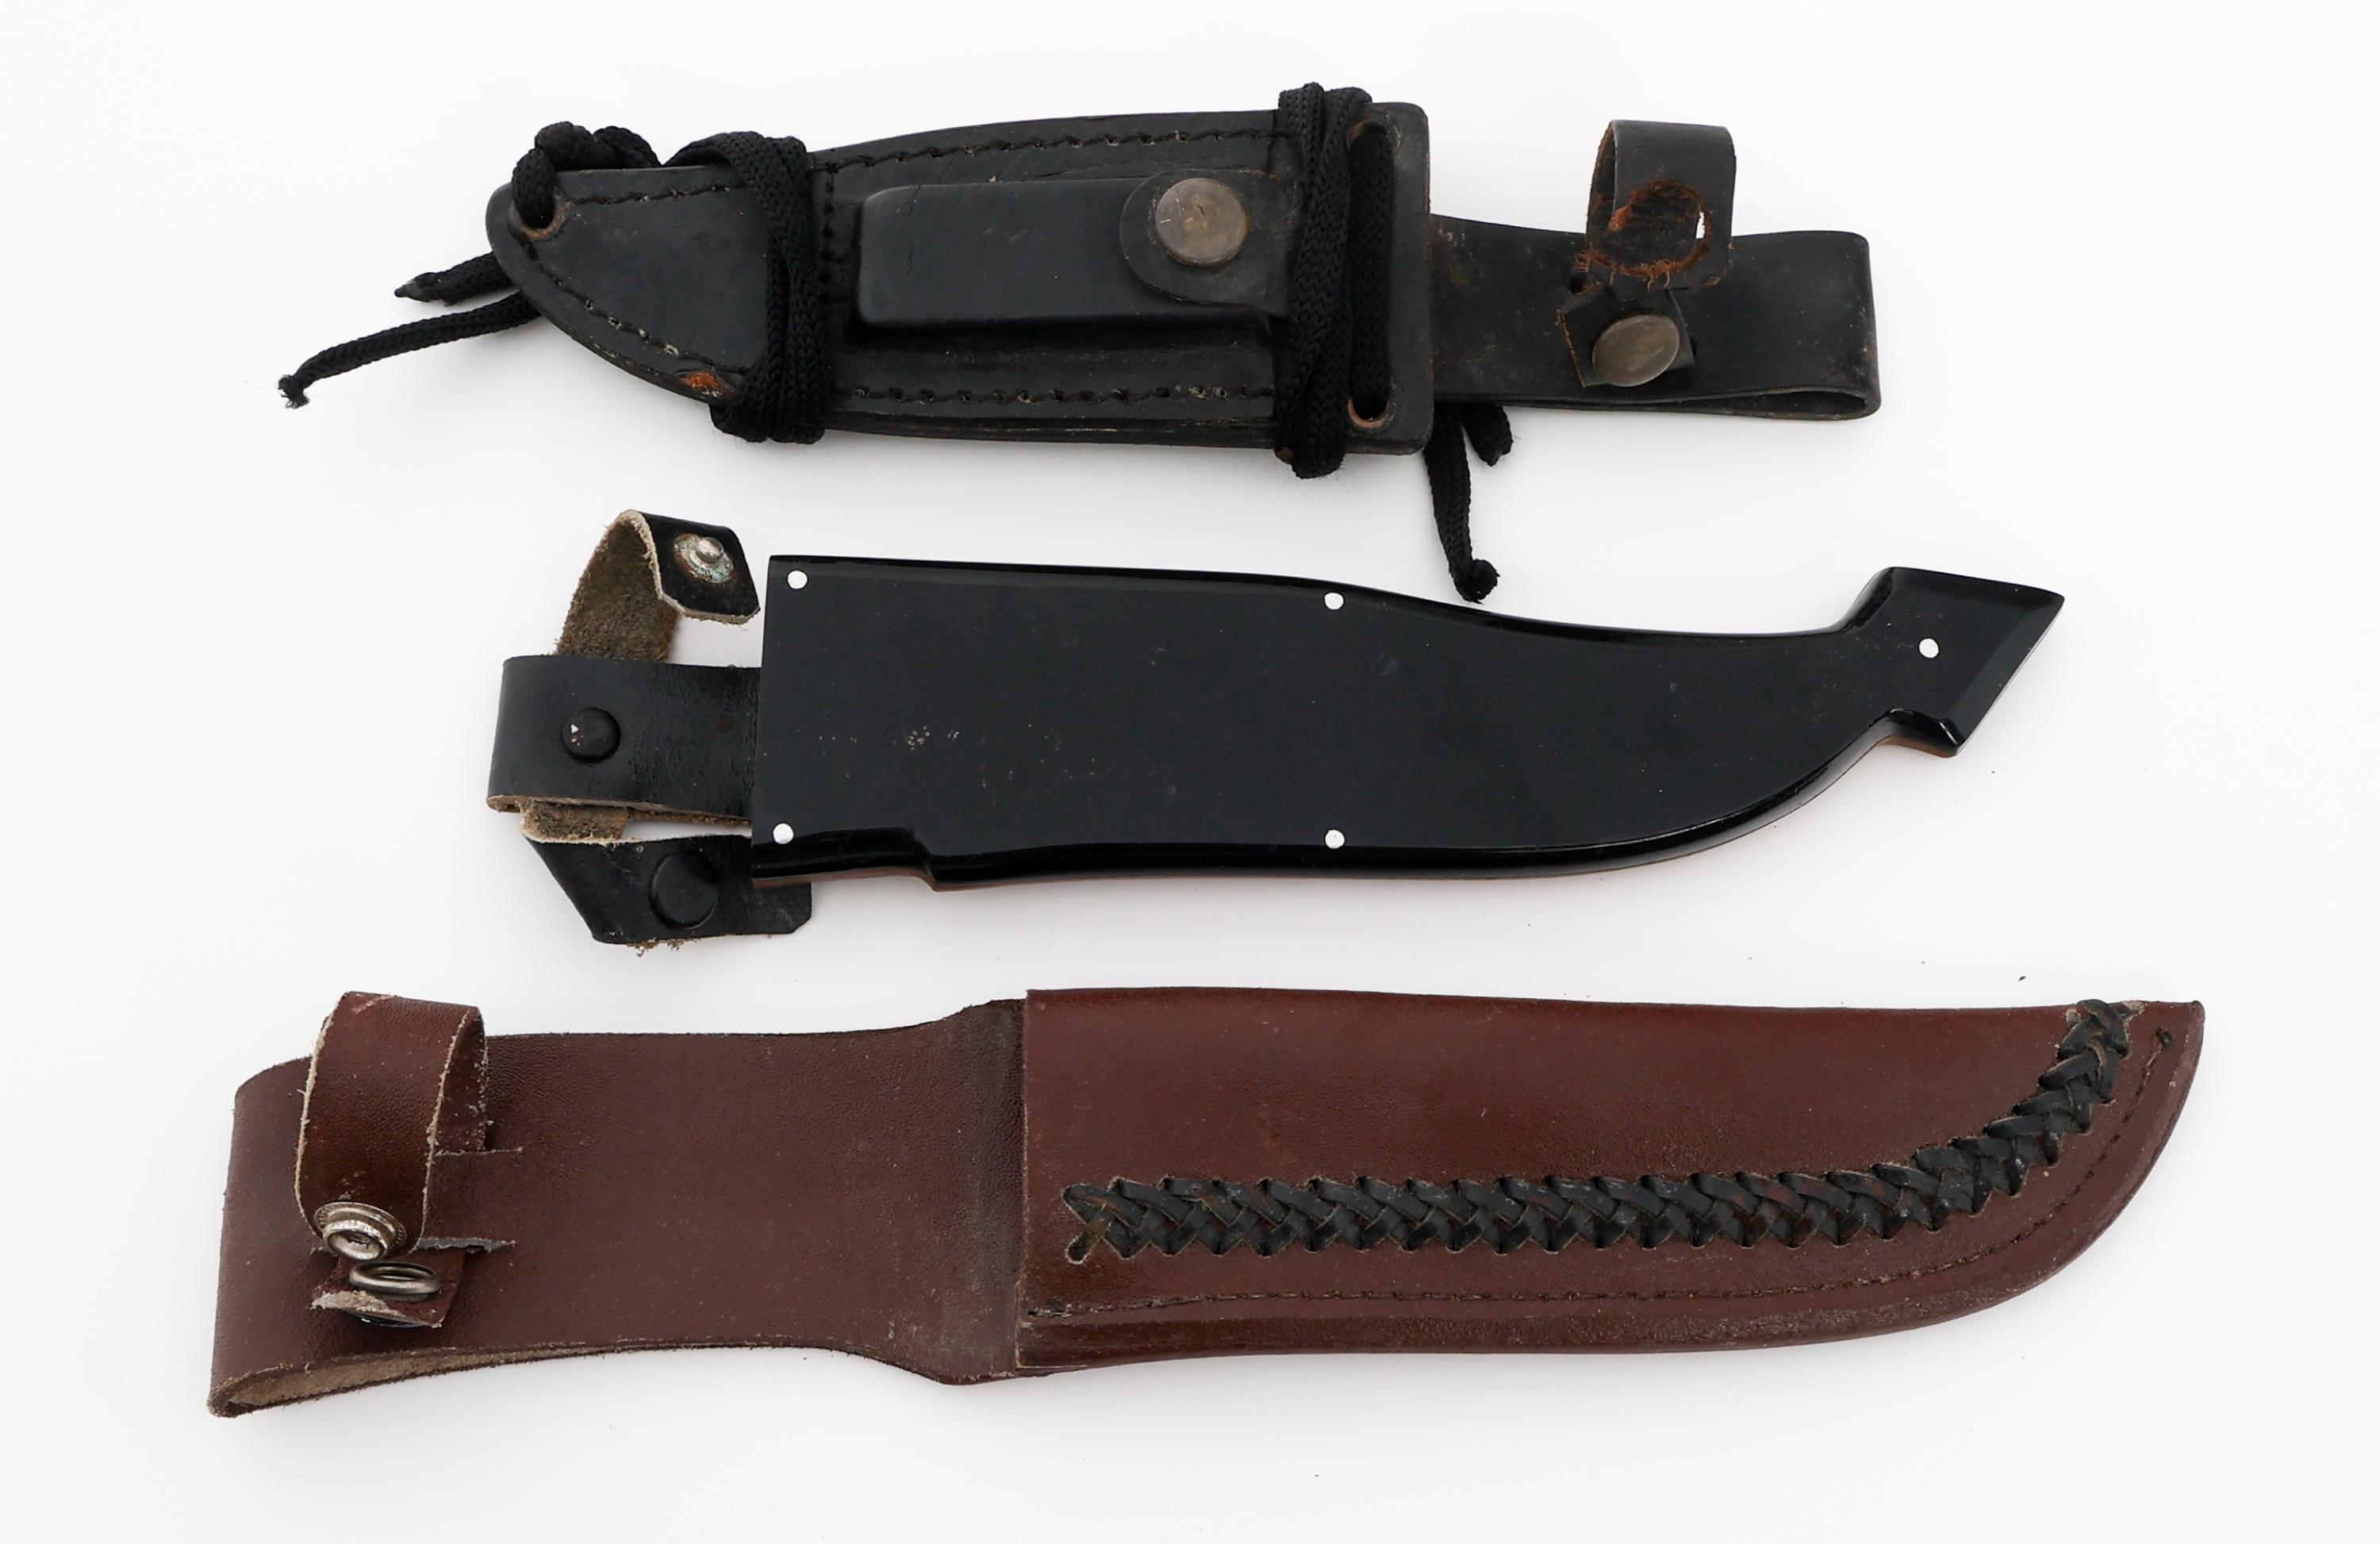 FIXED BLADE BOWIE & SURVIVAL KNIVES